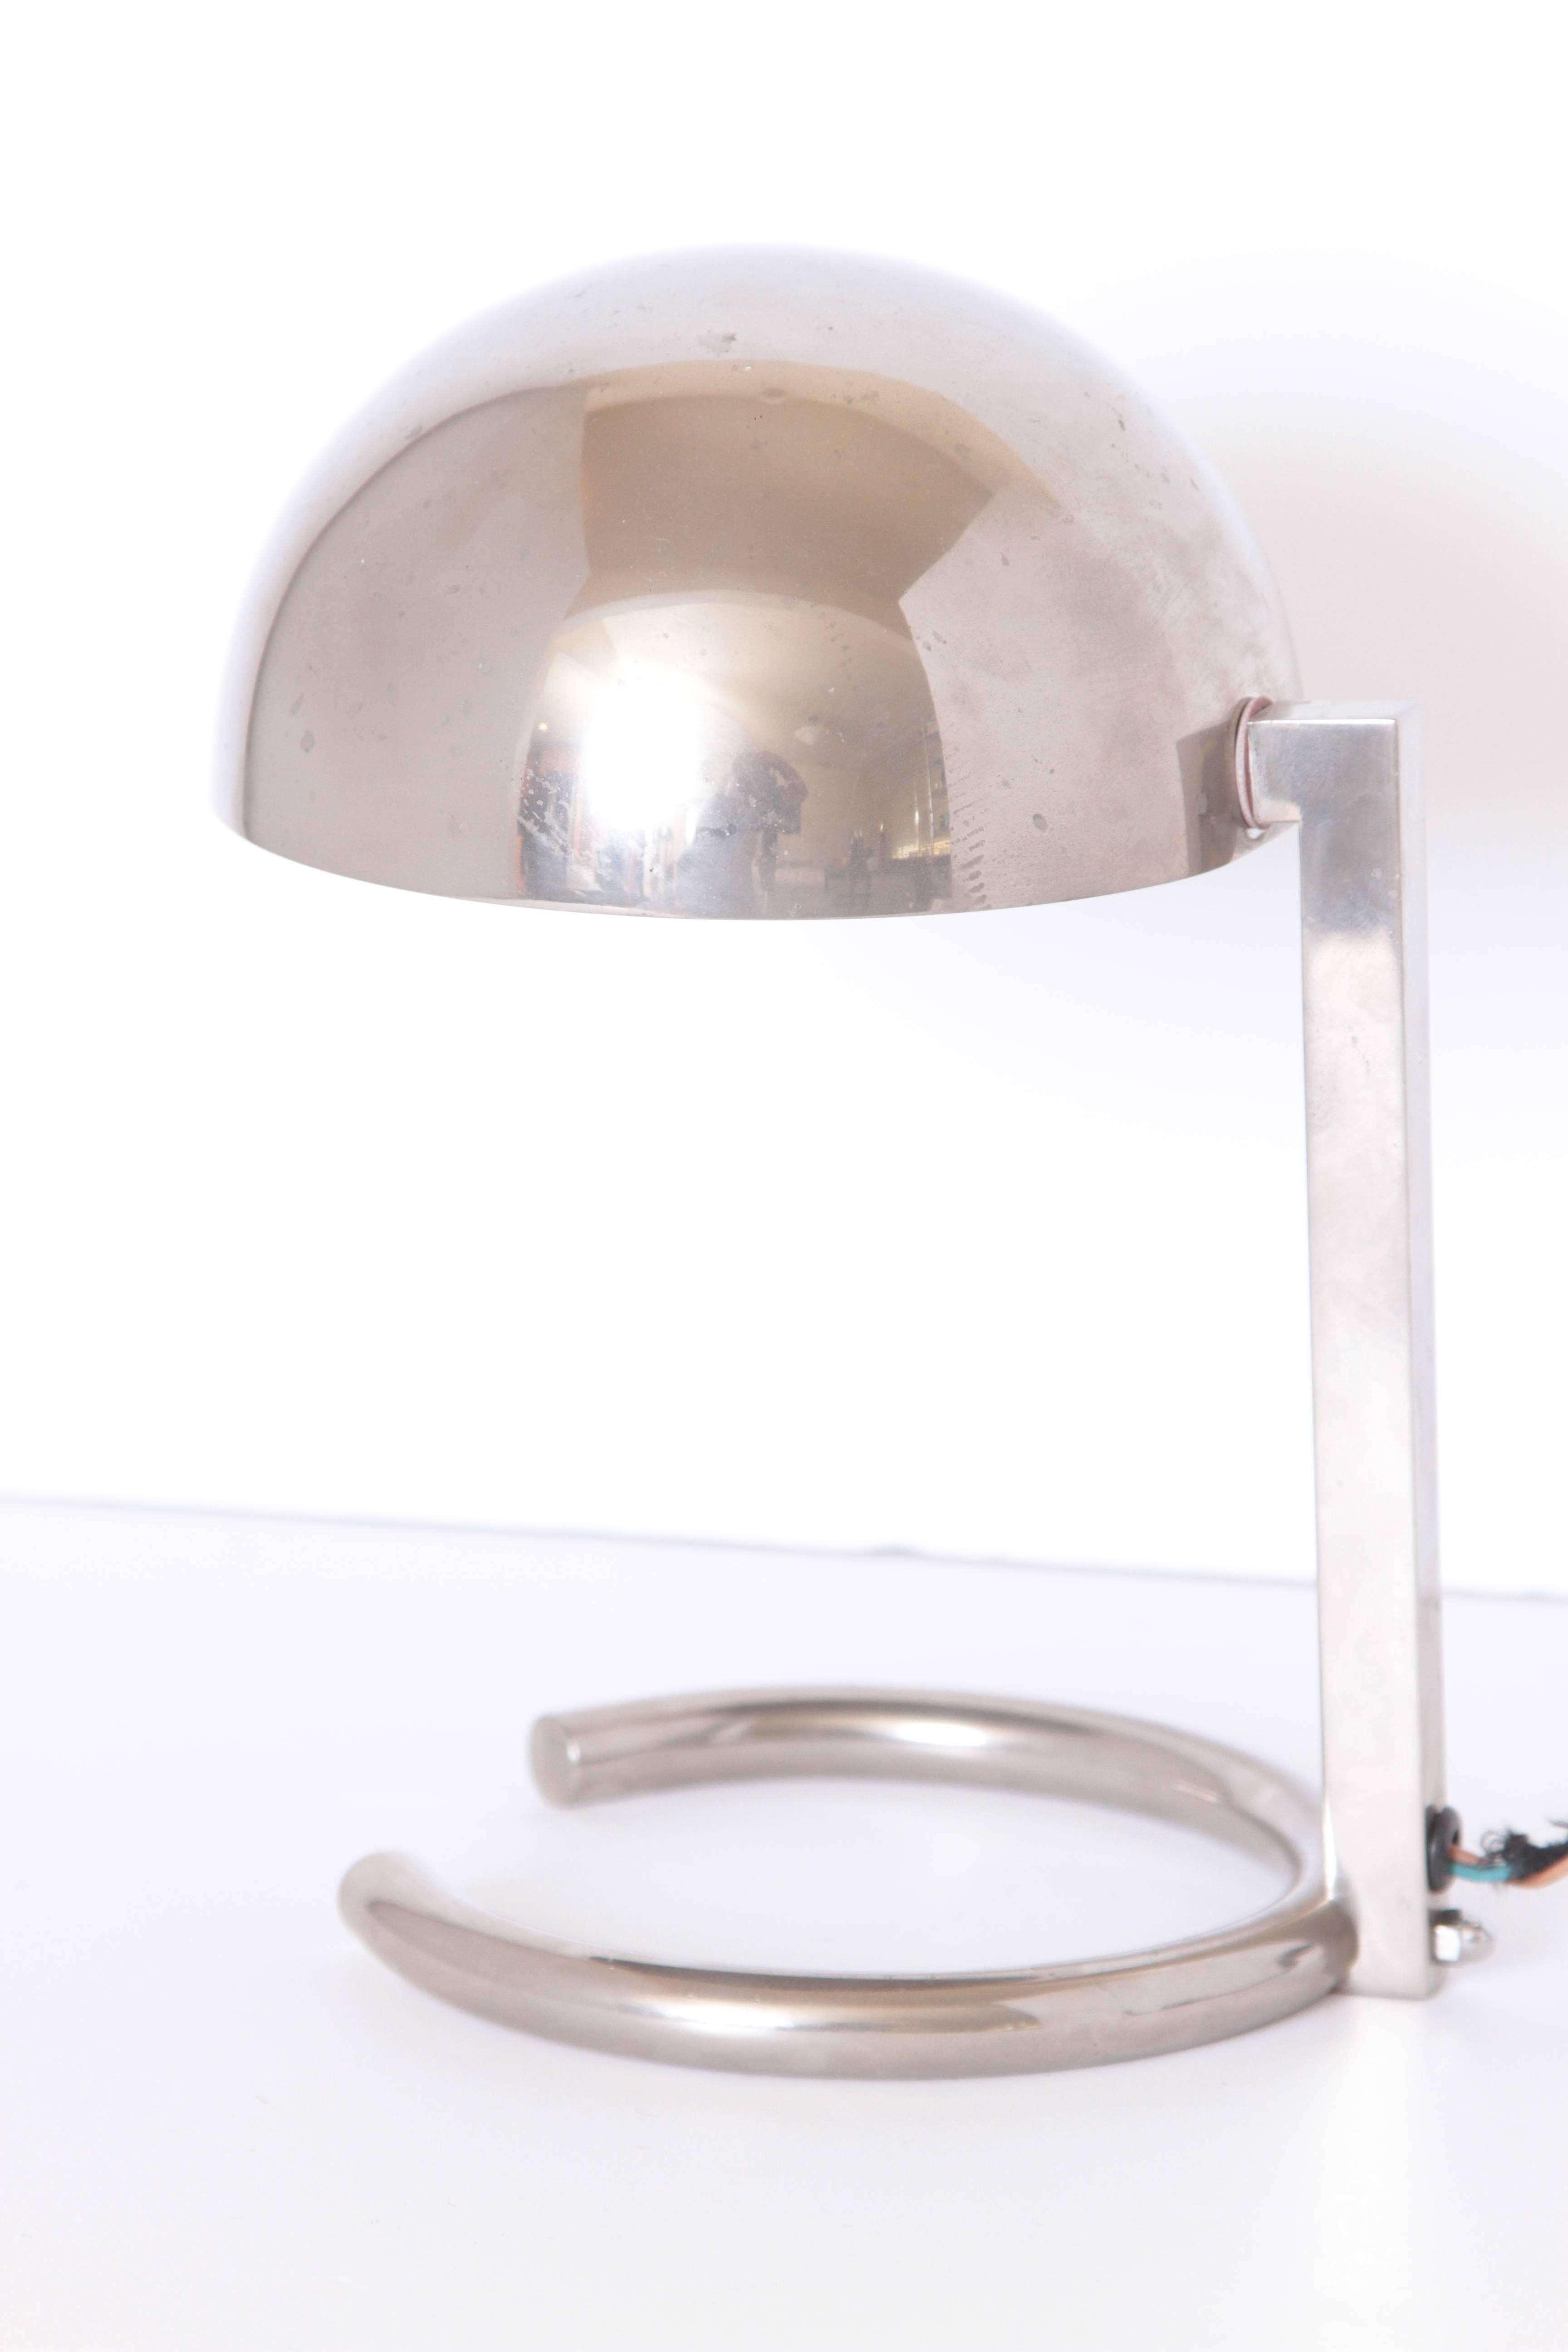 Machine Age Art Deco Jacques Adnet French midcentury table / desk lamp

Iconic Adnet streamline modernist lamp design.
Nickel-plated brass.
Model # 407, France

circa 1950 production, per 